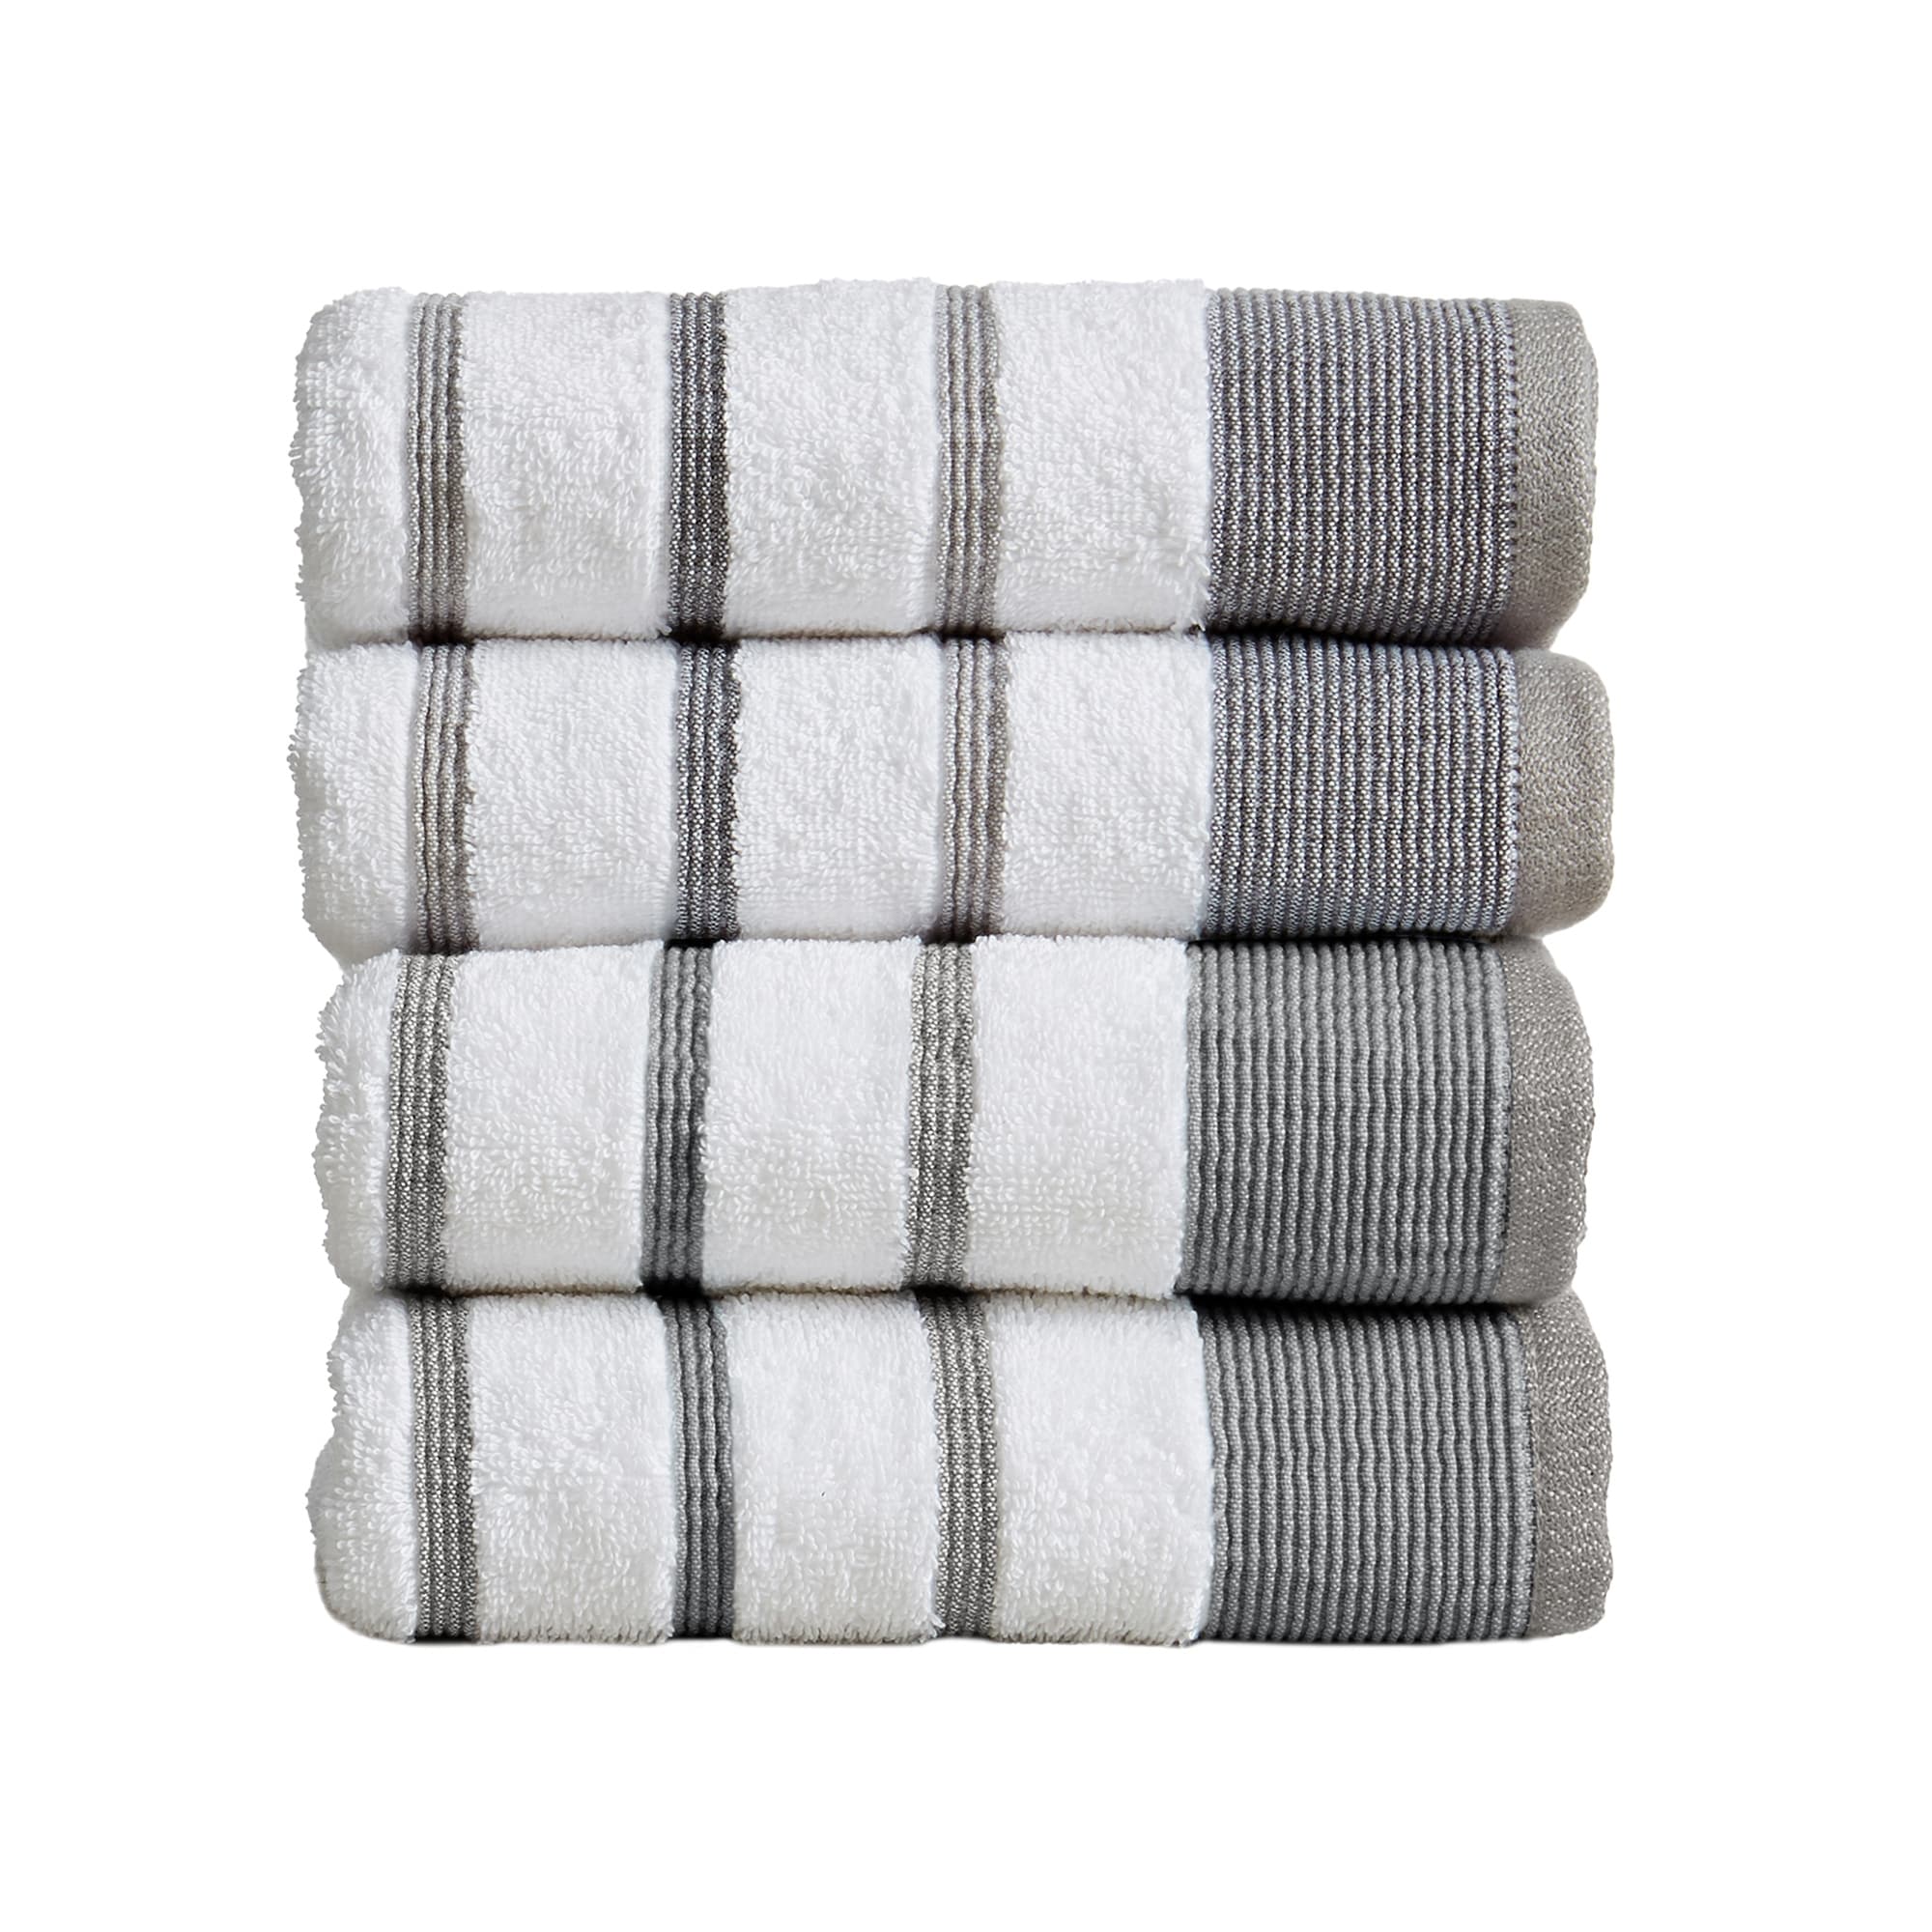 https://ak1.ostkcdn.com/images/products/is/images/direct/dcff80b95f2d16f908962a0f45aeb7847047e0bc/Great-Bay-Home-Turkish-Cotton-Striped-Bath-Towel-Sets.jpg